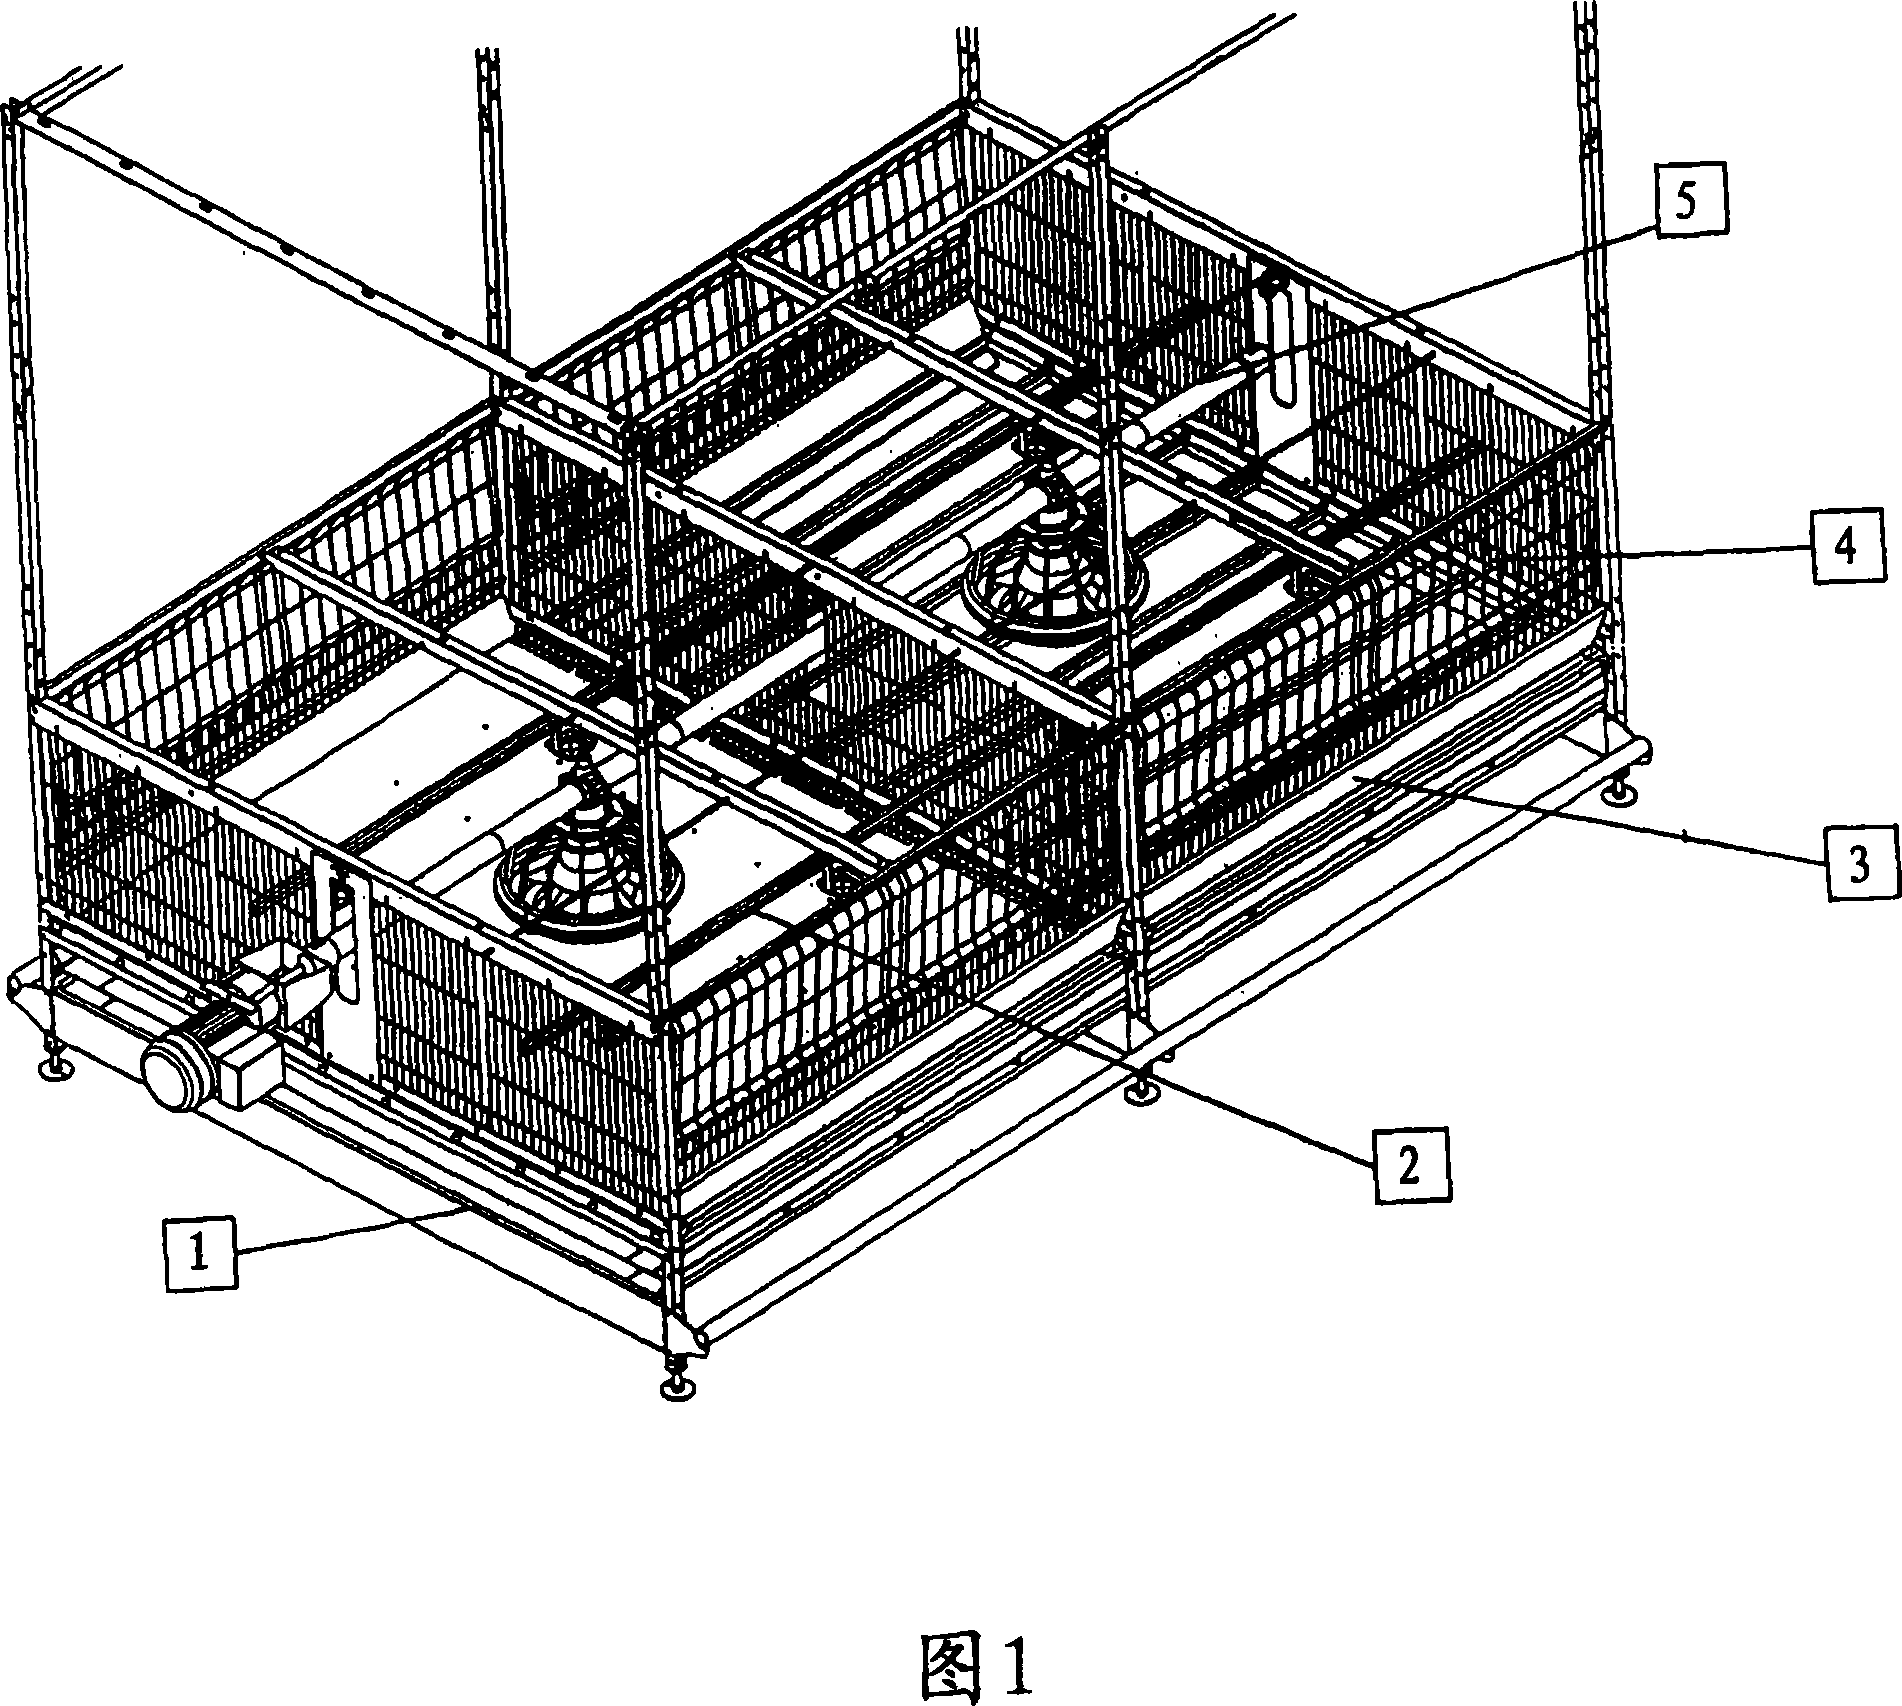 Poultry cage rearing system